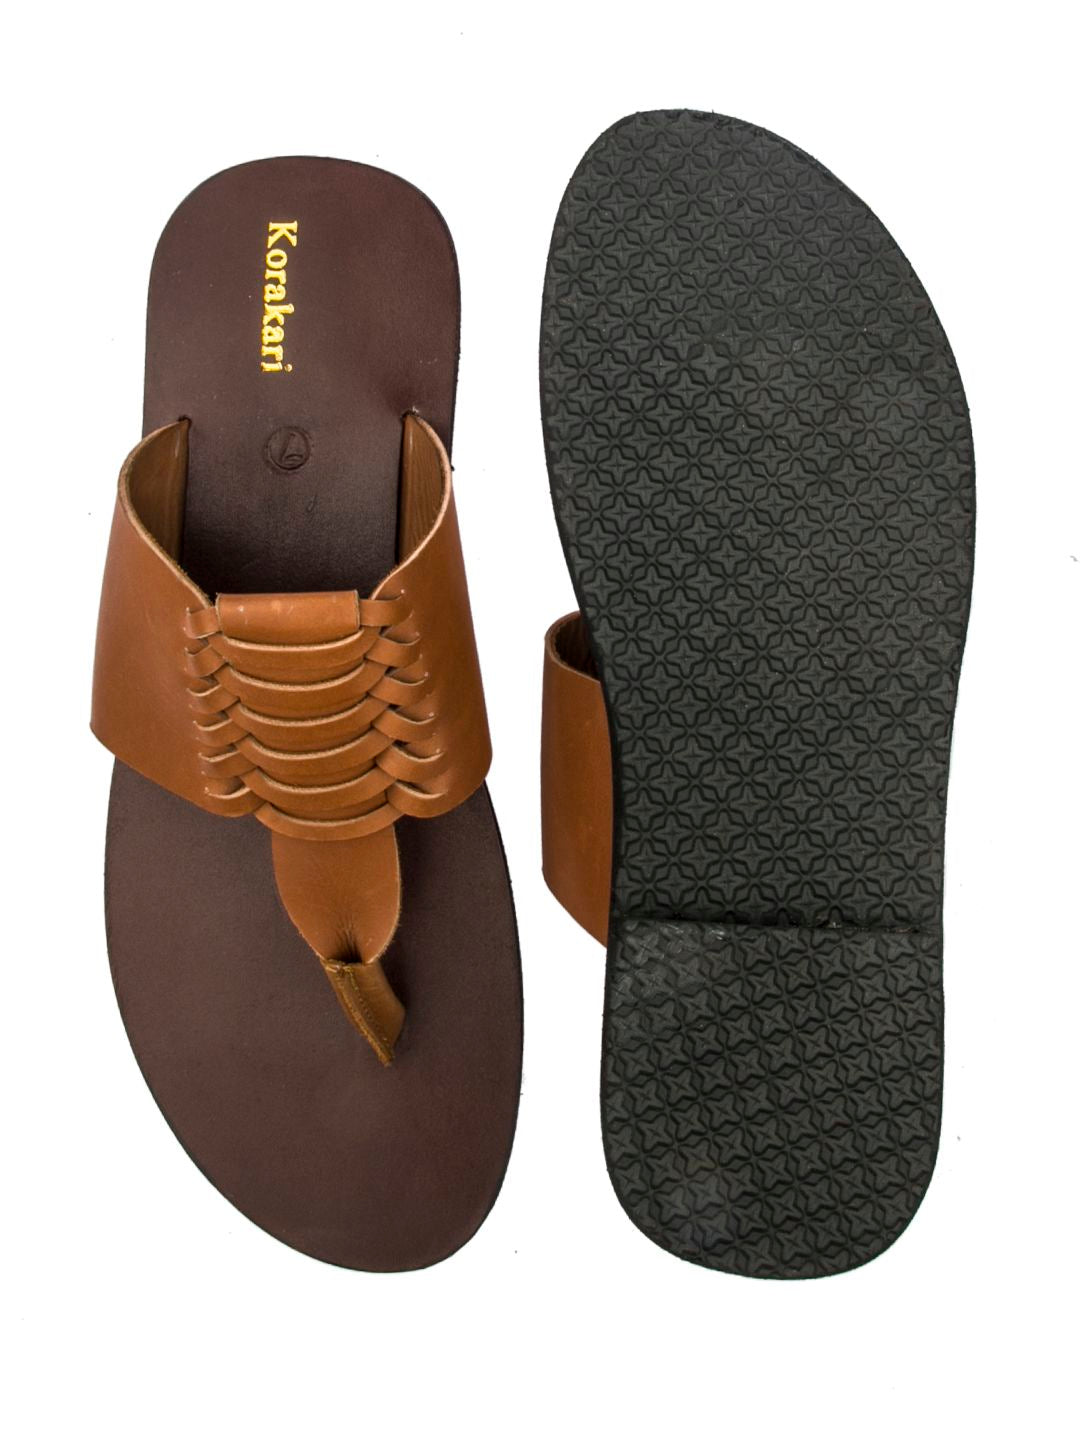 Timeless Roman Elegance: Handmade Tan and Brown Leather Sandals for Men